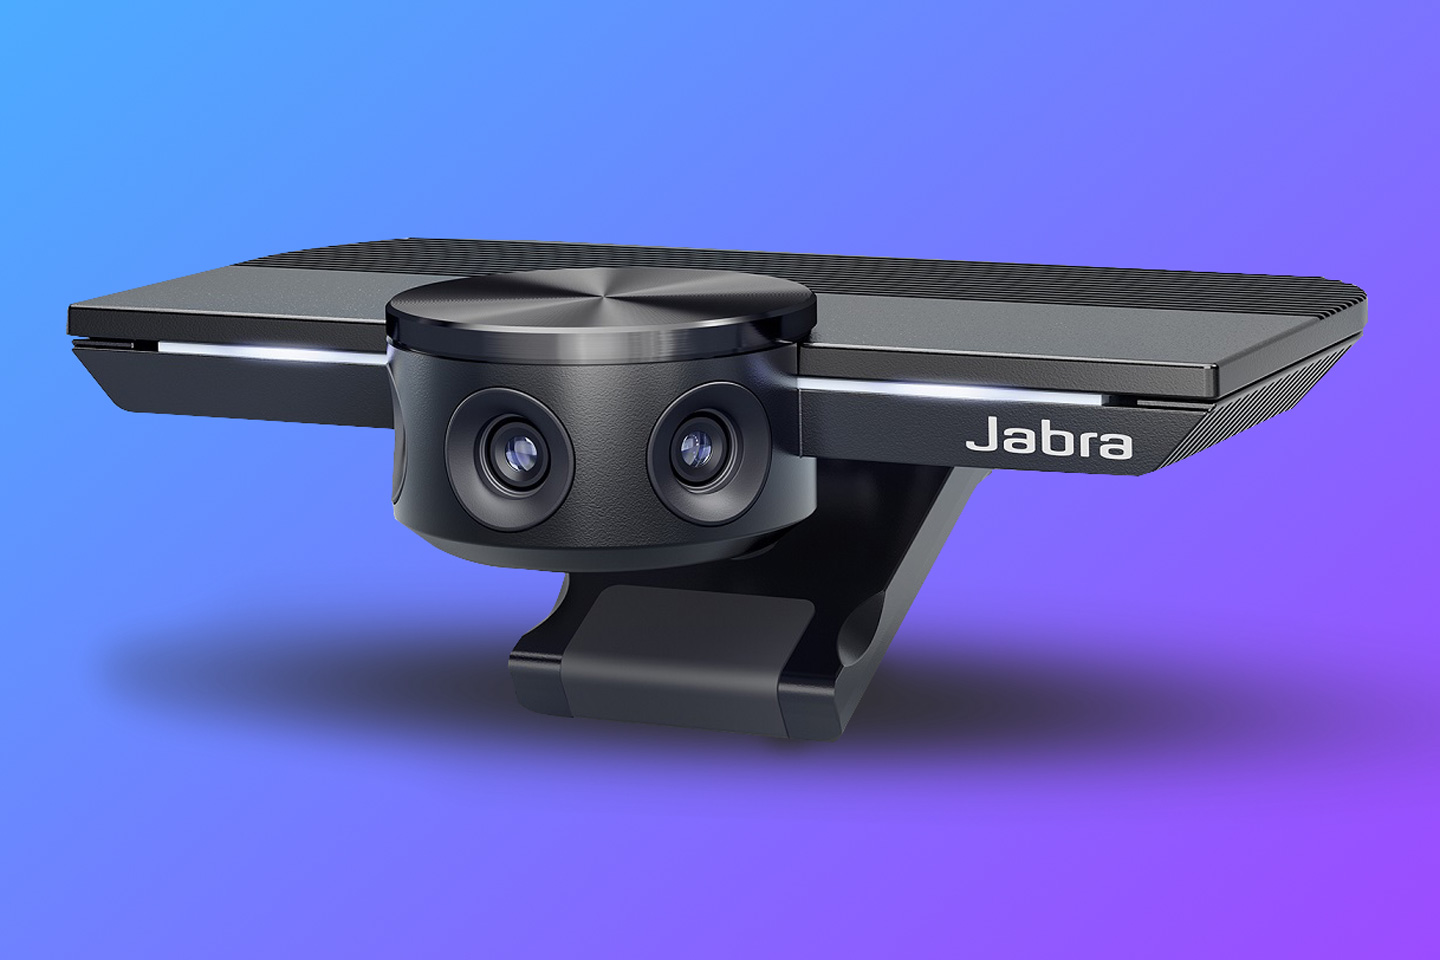 #Jabra’s triple-lens webcam has a wide-angle 180° FOV, completely crushing Apple’s Center Stage